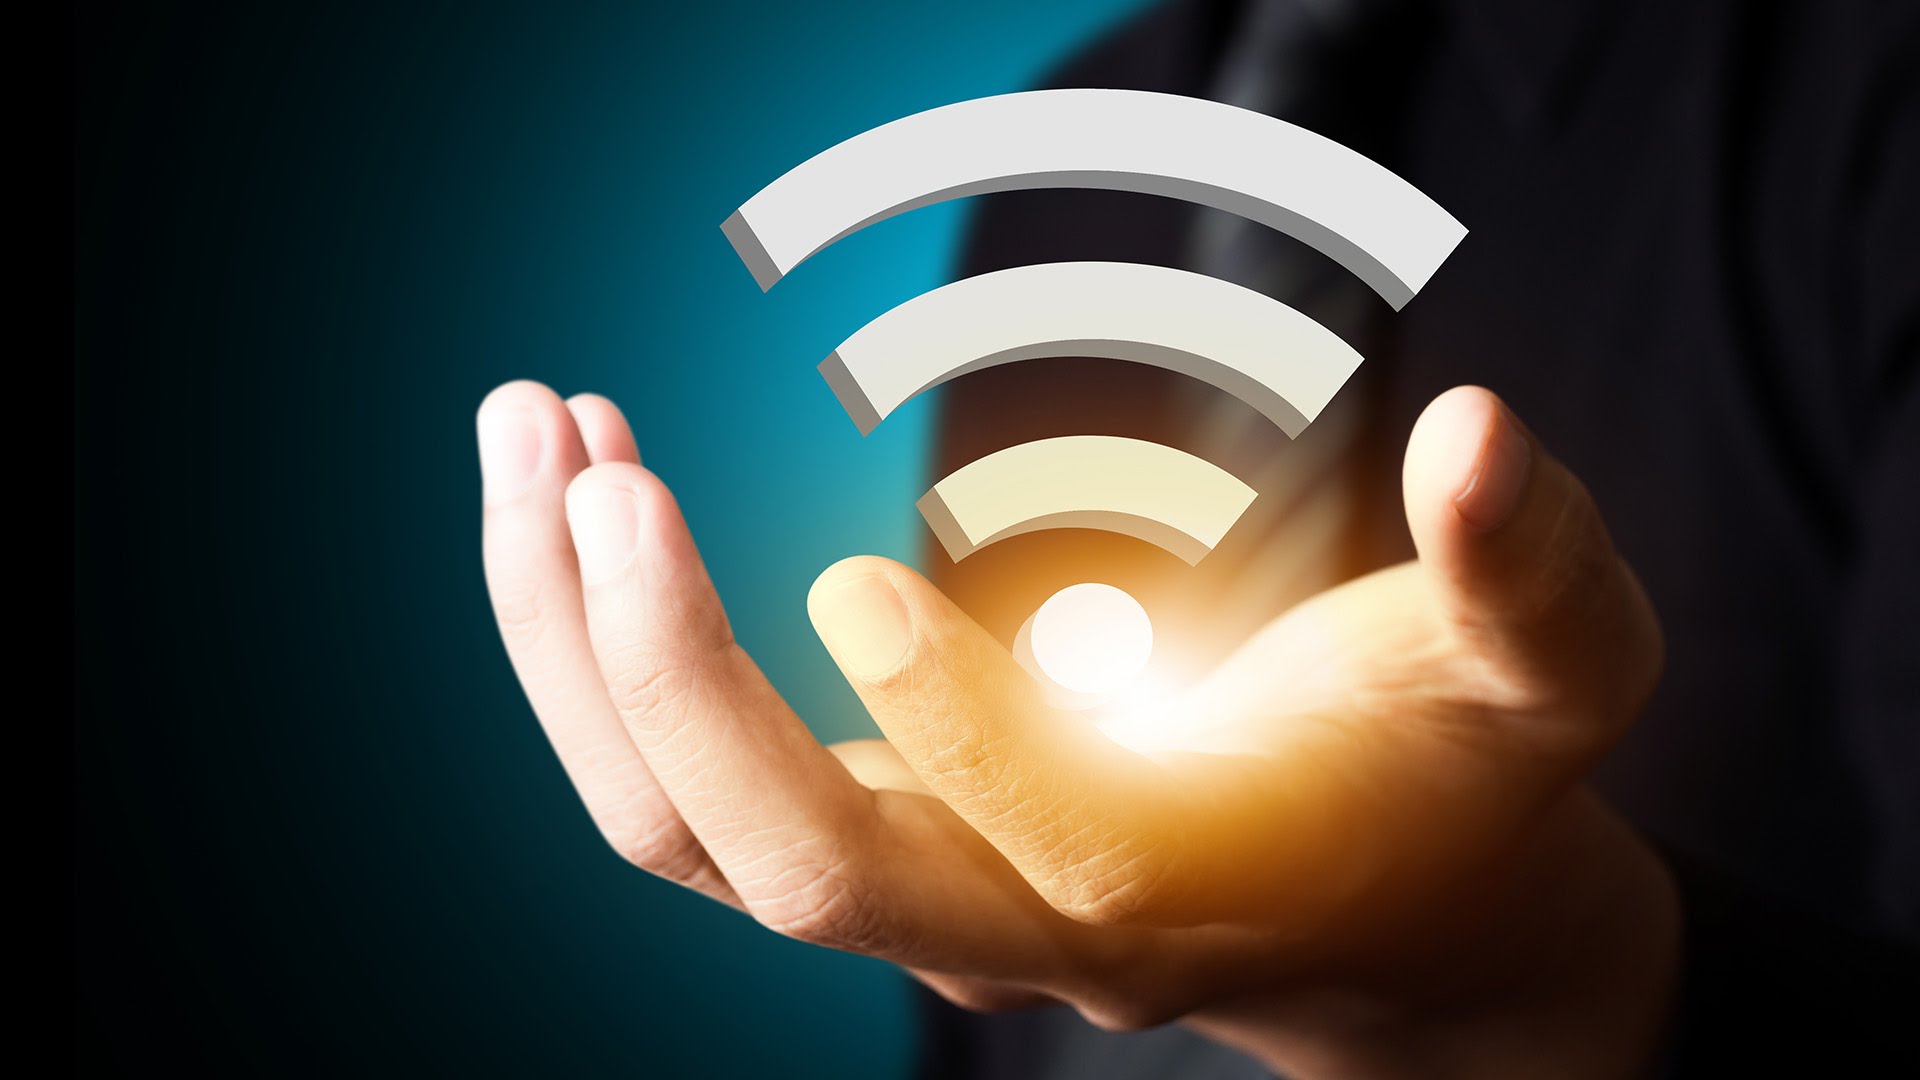 How Your Business Stands to Benefit from Enterprise-Class WiFi